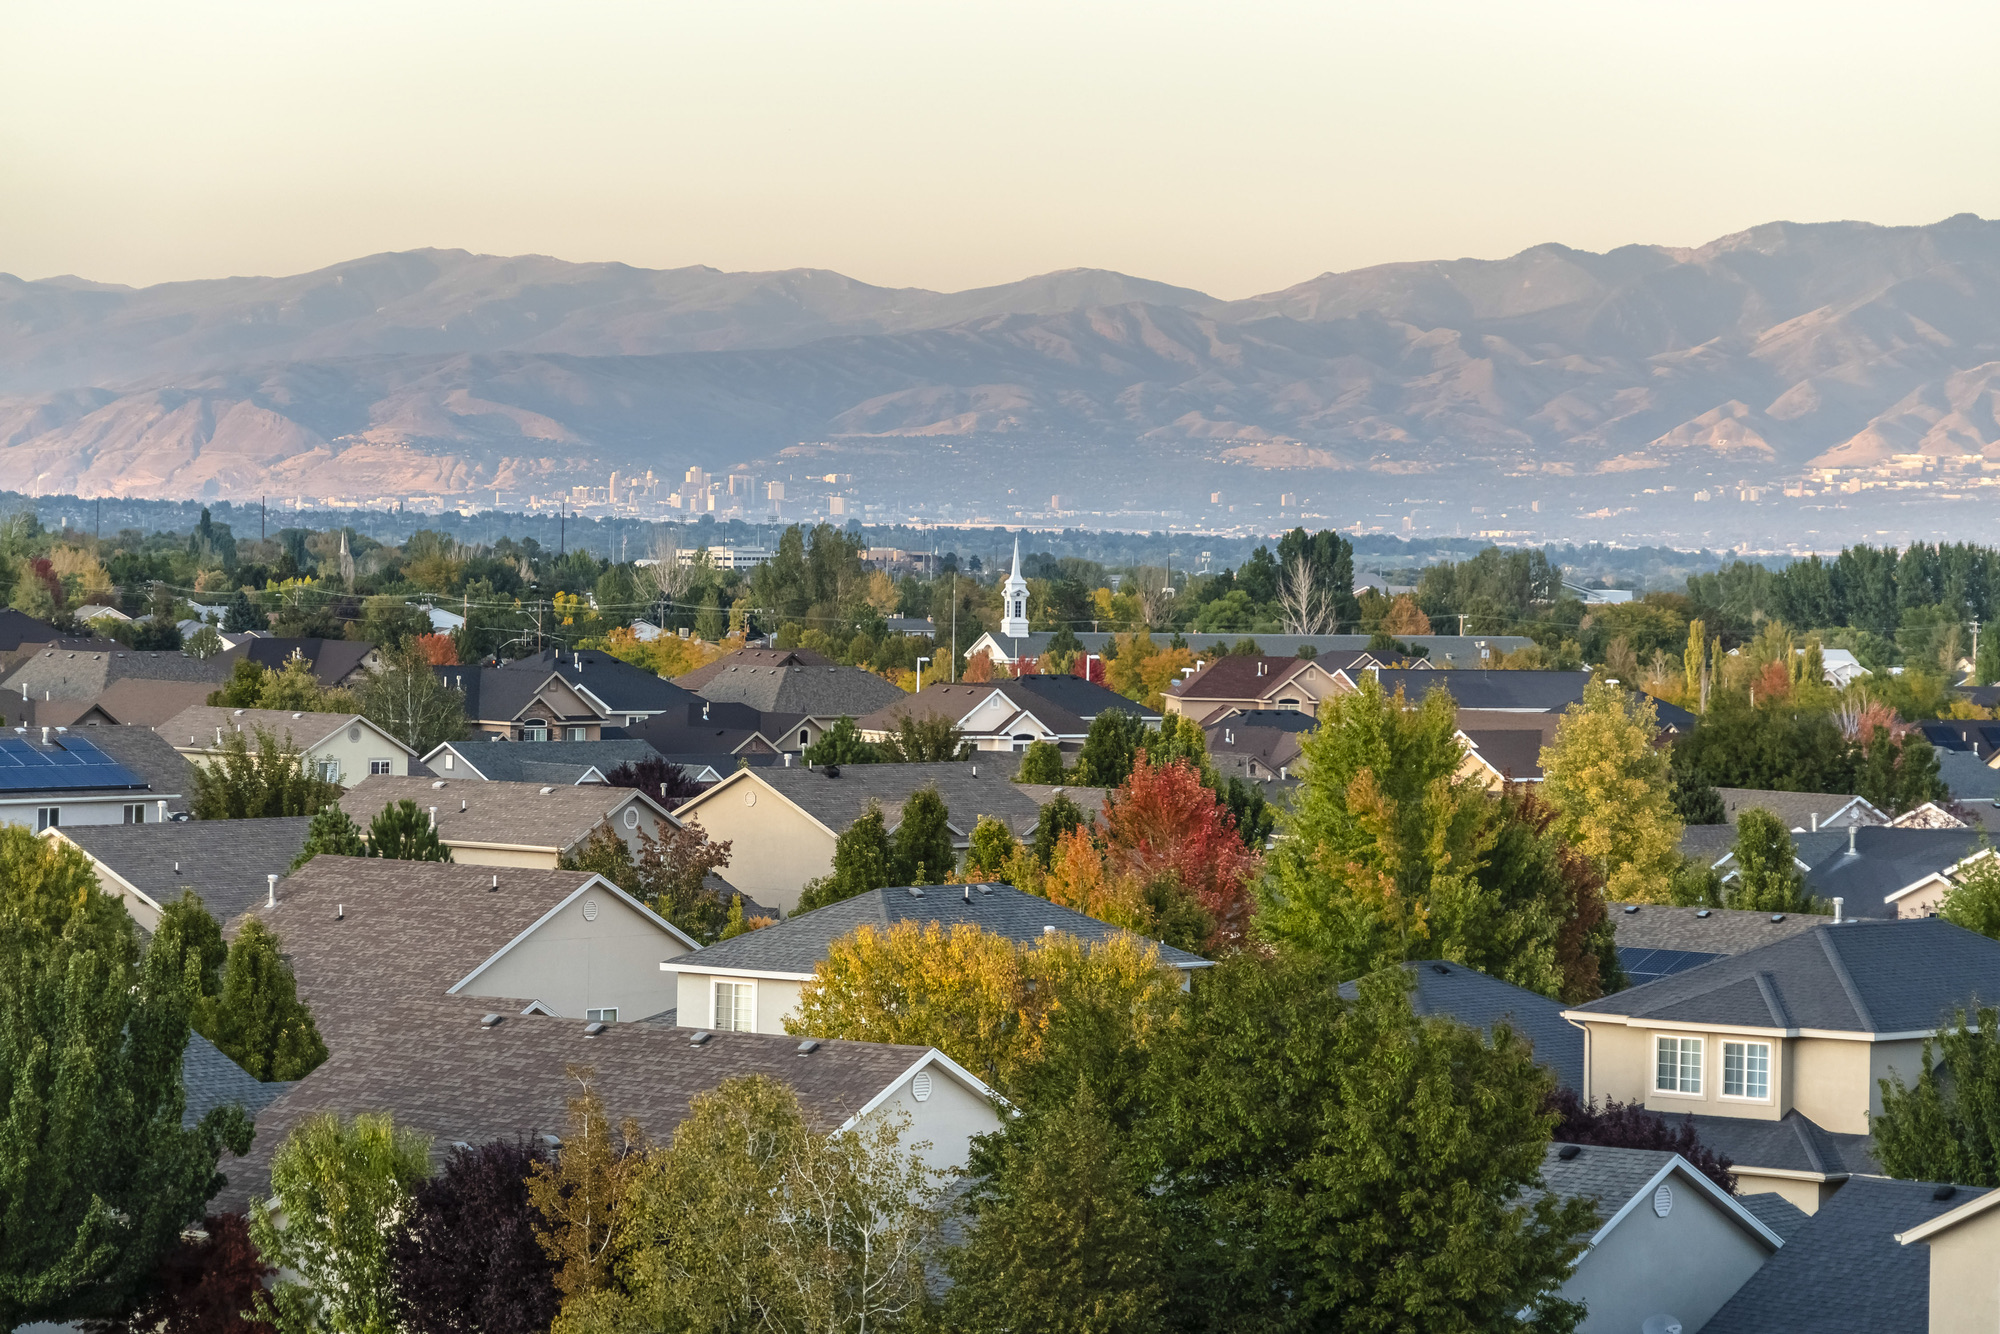 Rooftop view of a suburb of Salt Lake City, Utah. Rooftop view of a suburb of Salt Lake City, Utah with houses nestled amongst green trees and a distant mountain range